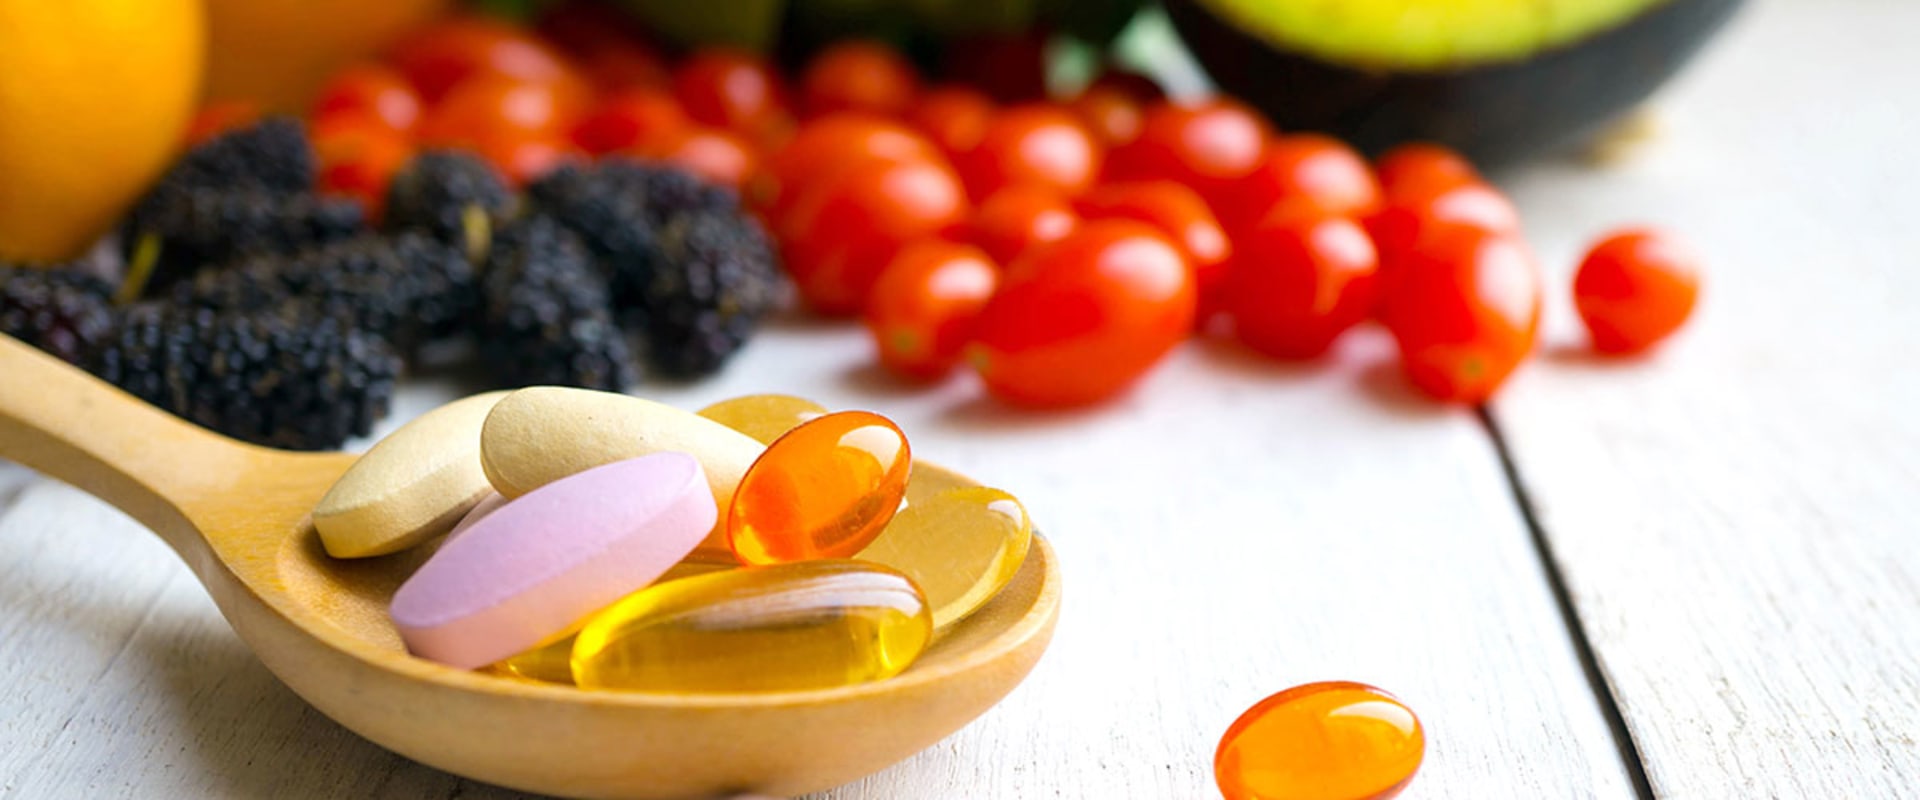 Can I Take a Multivitamin and Other Supplements Safely? - An Expert's Guide